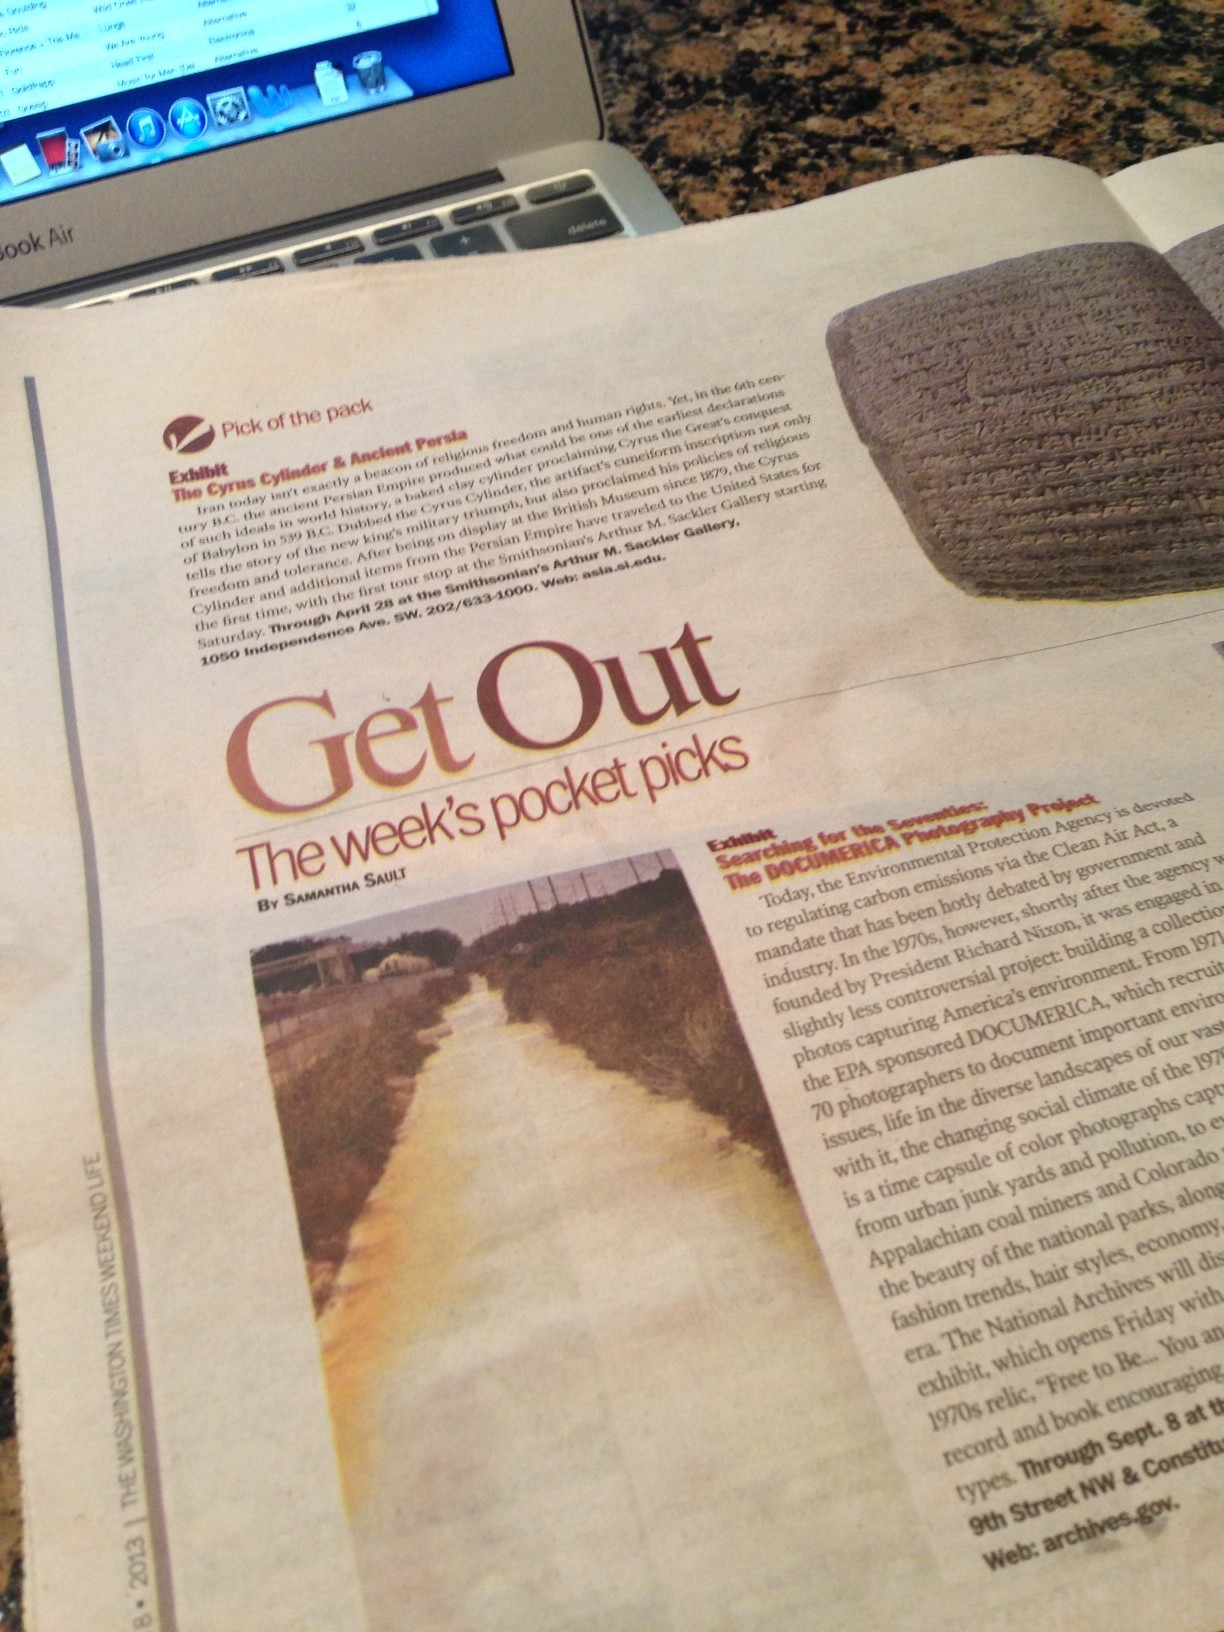 Washington Times "Get Out" by Samantha Sault